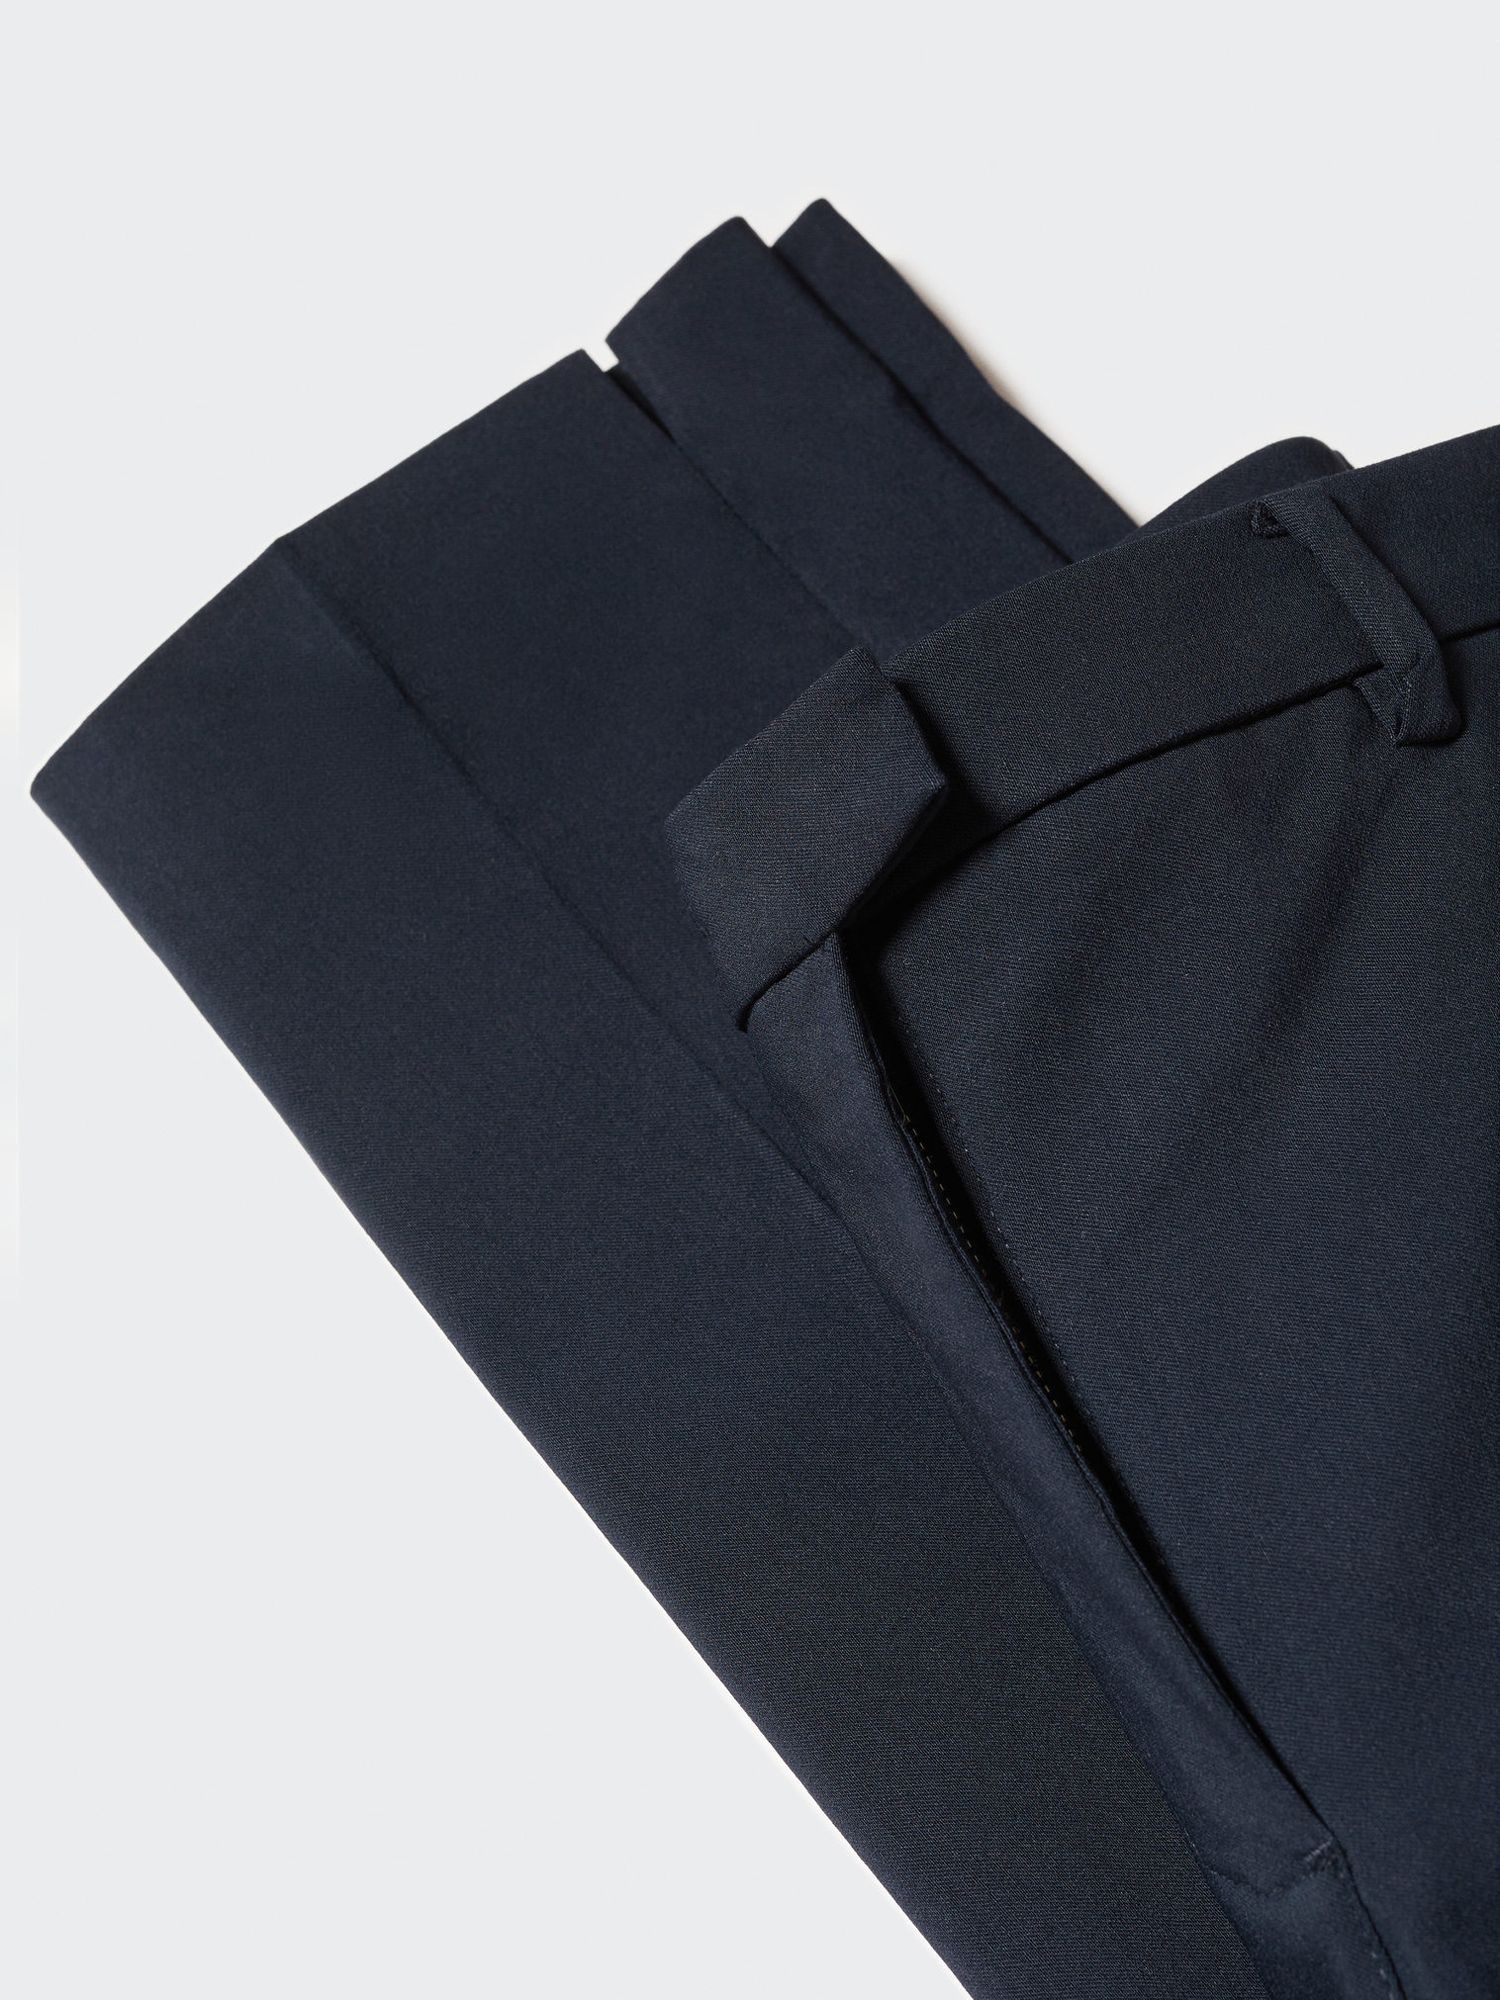 Mango Cola Tailored Trousers, Navy at John Lewis & Partners